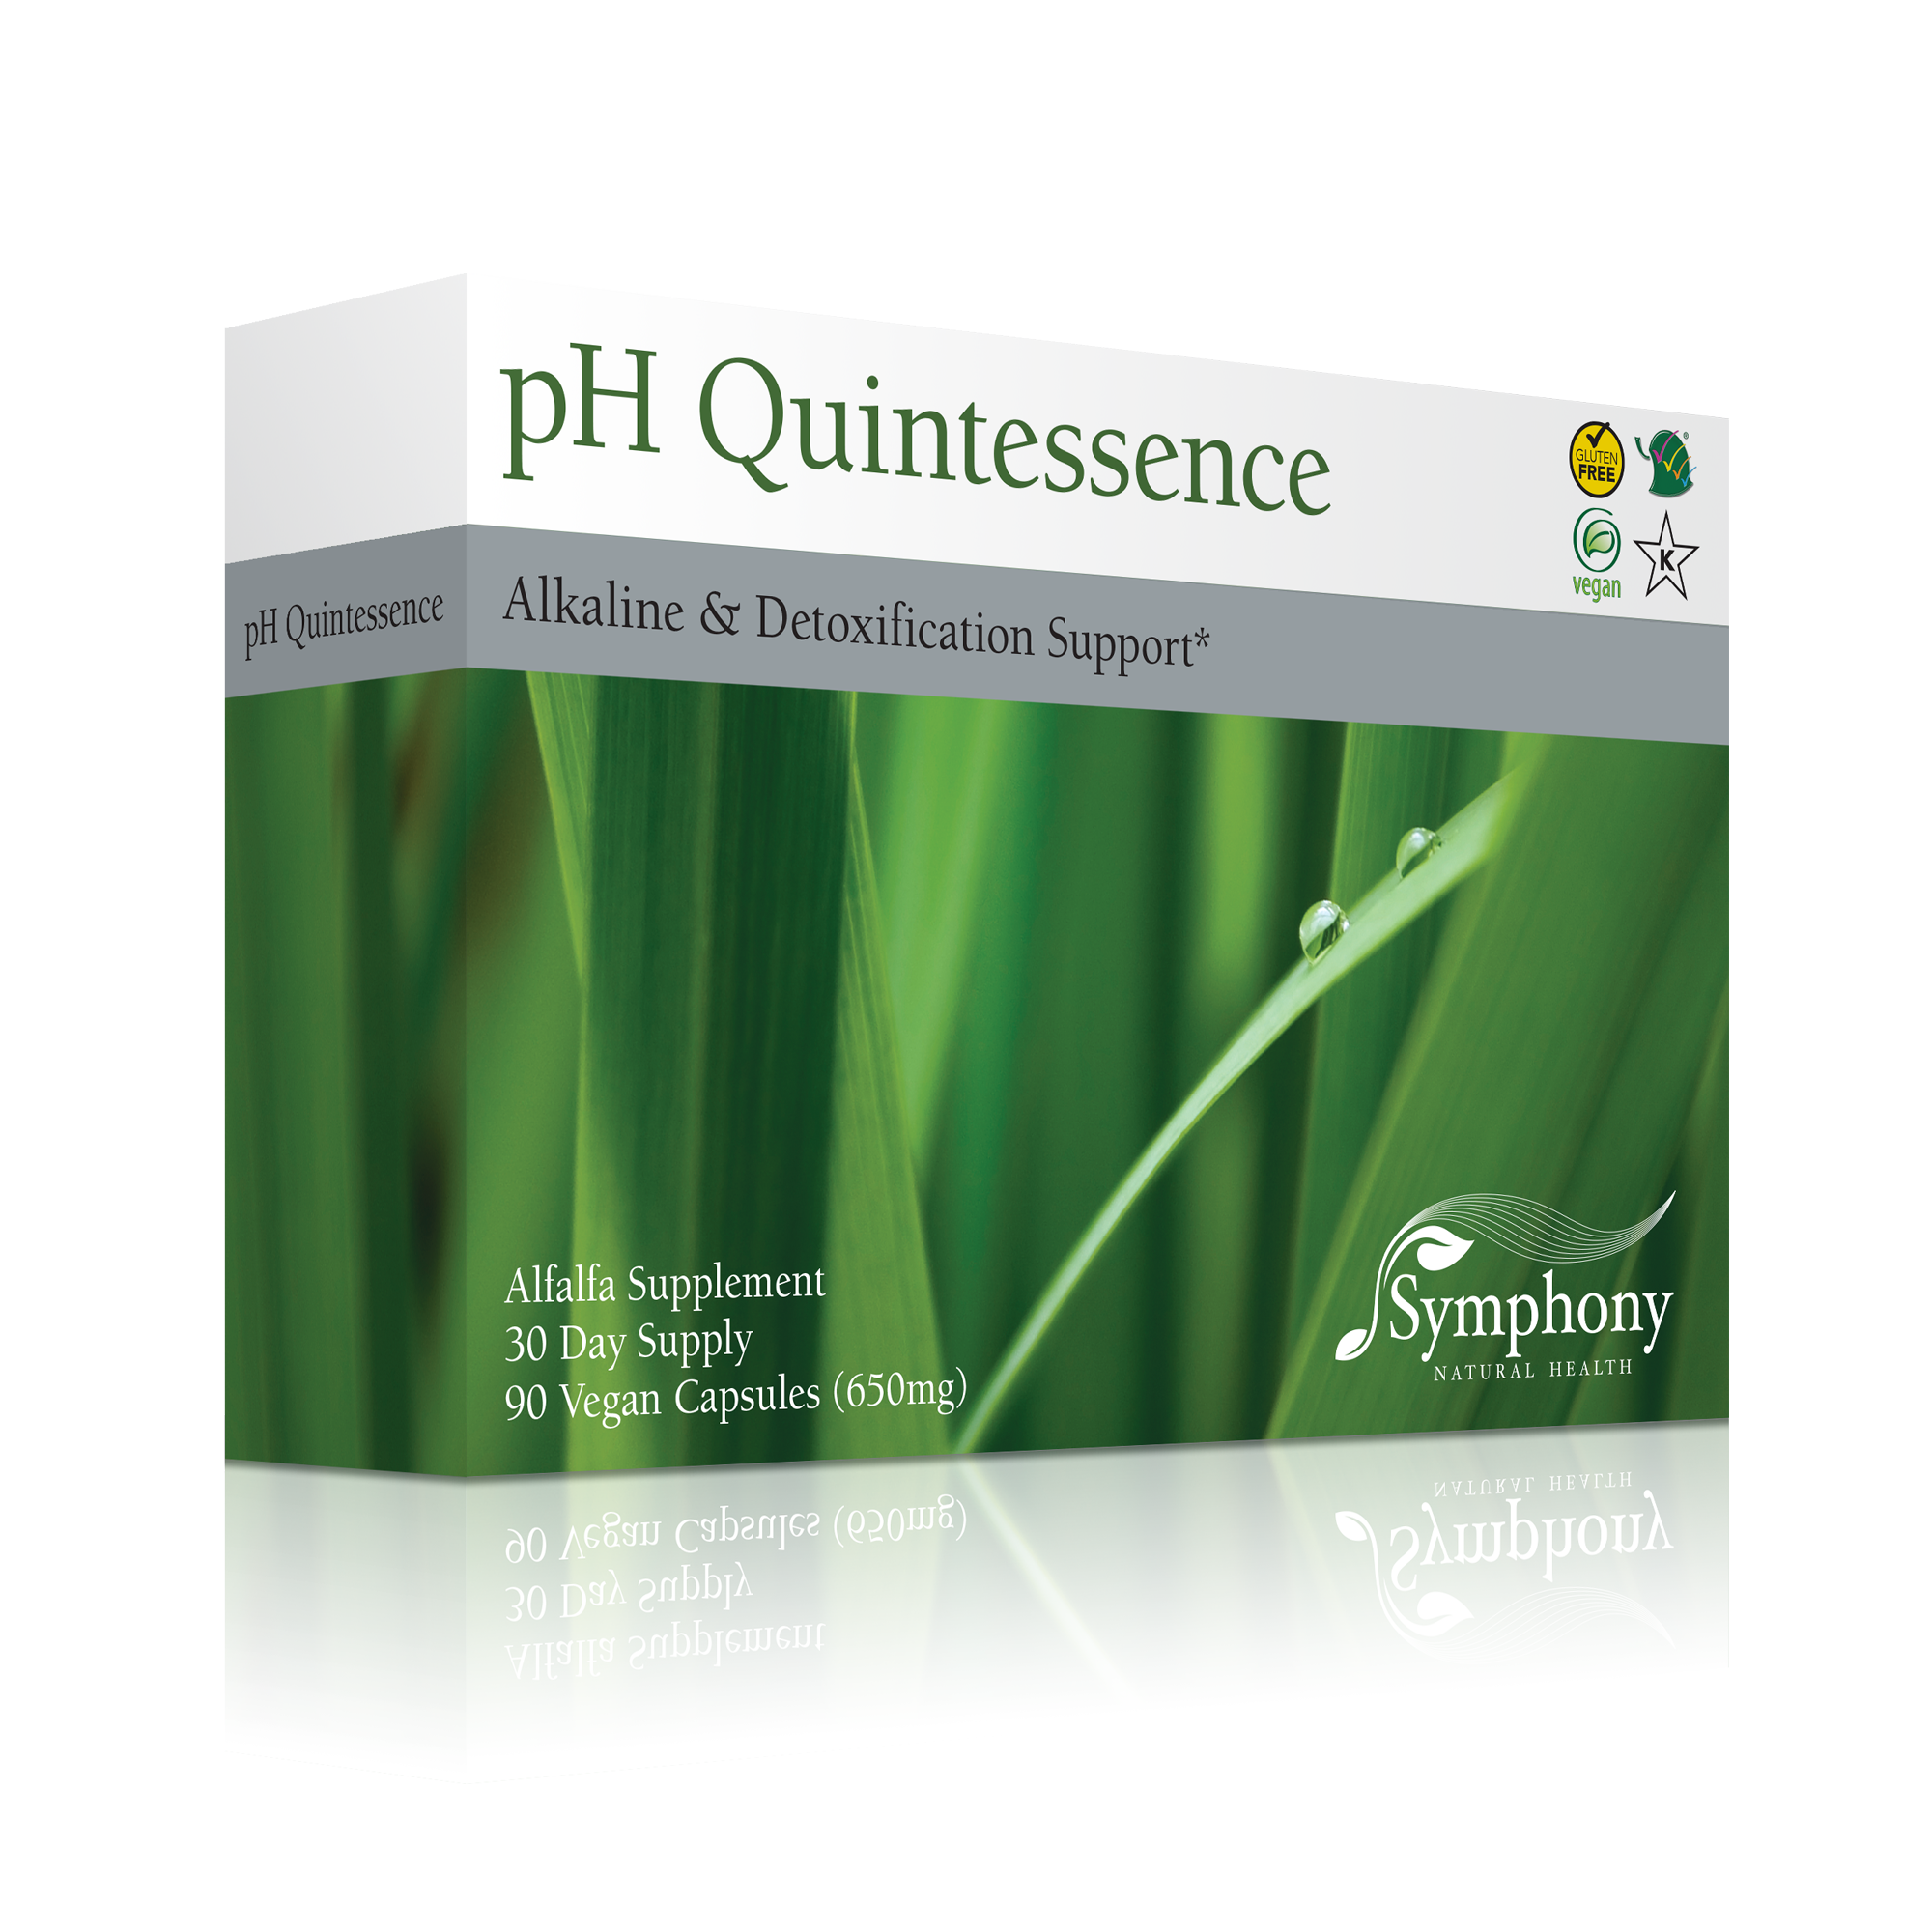 pH Quintessence right-facing product box with green leaves with water drops, vegan, gluten free, Kosher